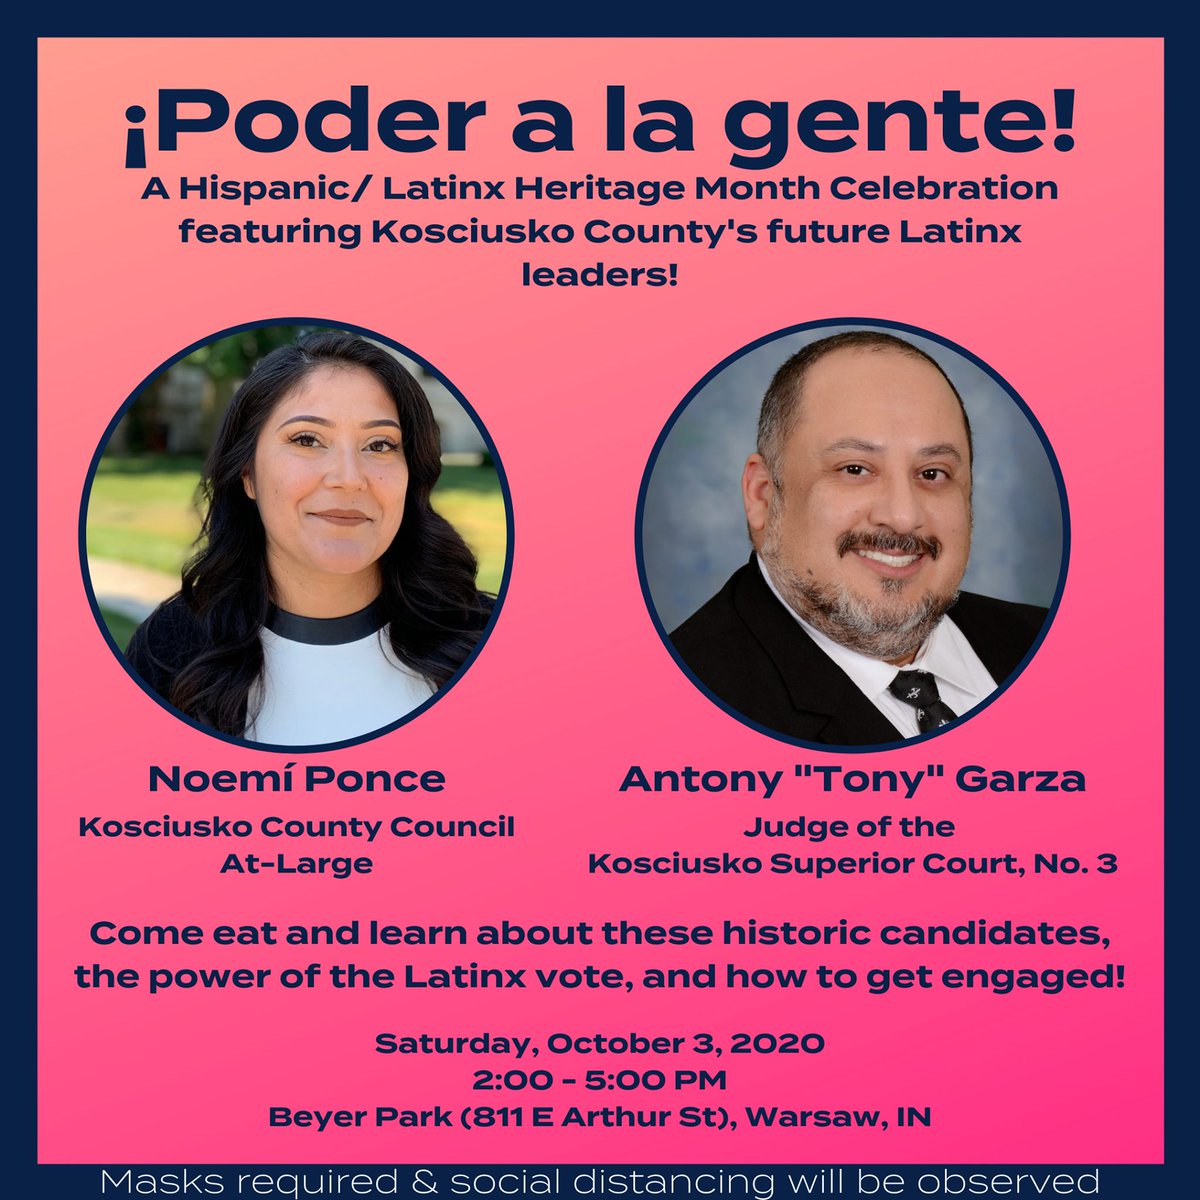 Show your support for our Latinx  @KosciuskoDems Candidates Noemi Ponce &  @for_garza at their evet: ¡Poder a la Gente! A Hispanic/ Latinx Heritage Month Celebration https://www.facebook.com/events/1258009787890140